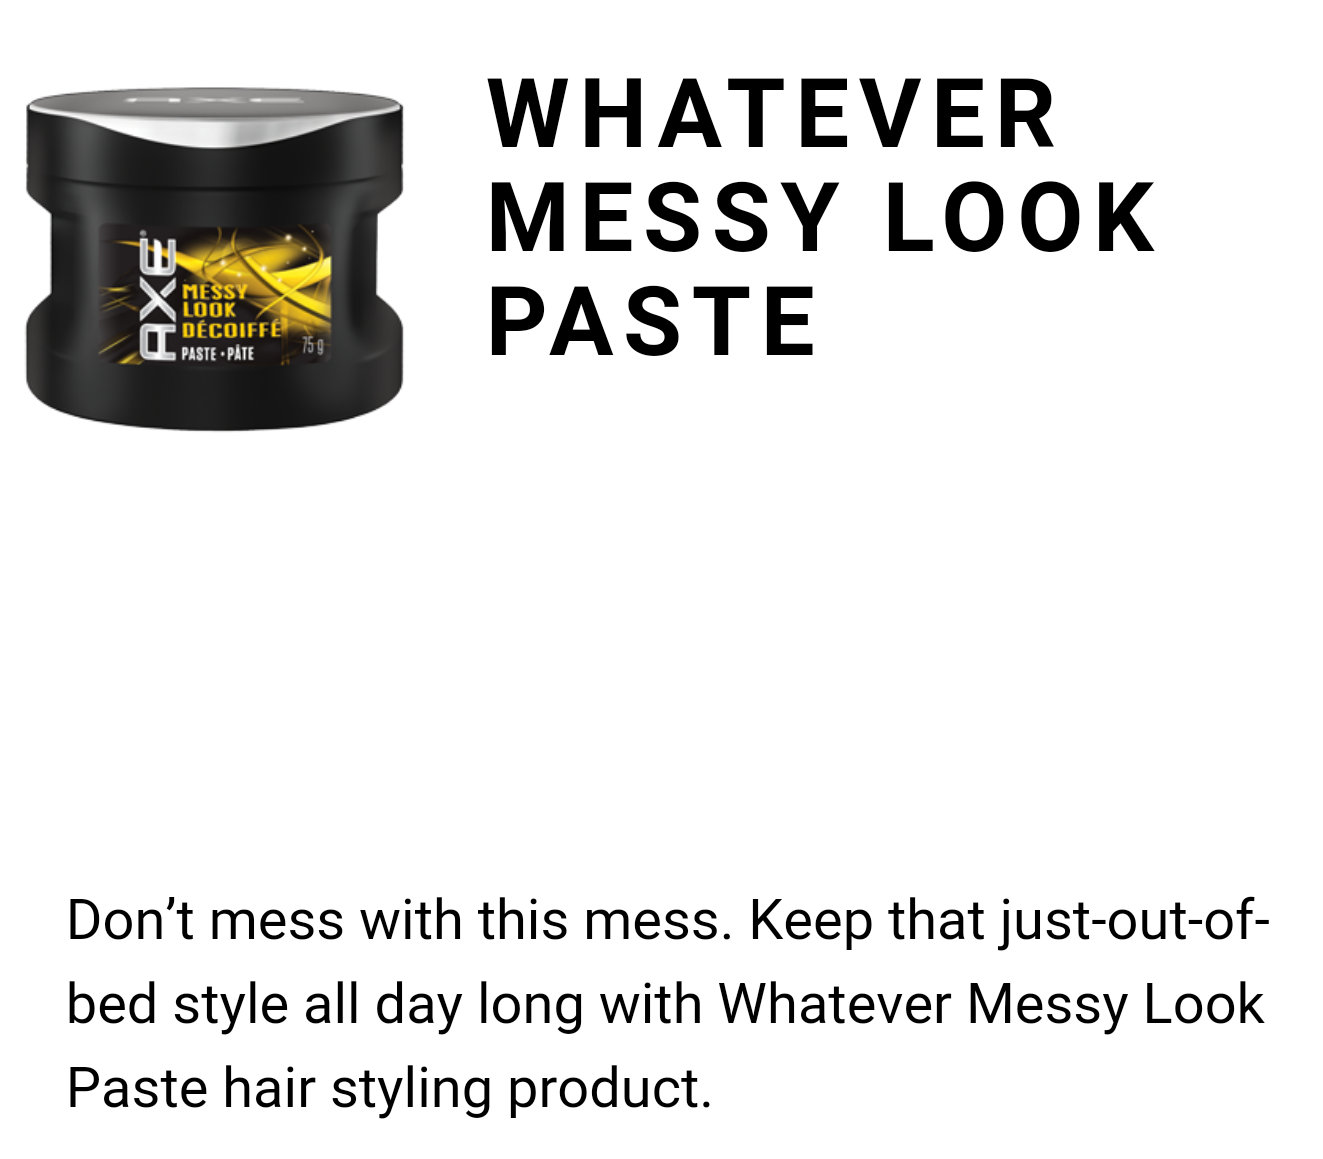 #AXEGOTSTYLE Whatever Messy Look Paste